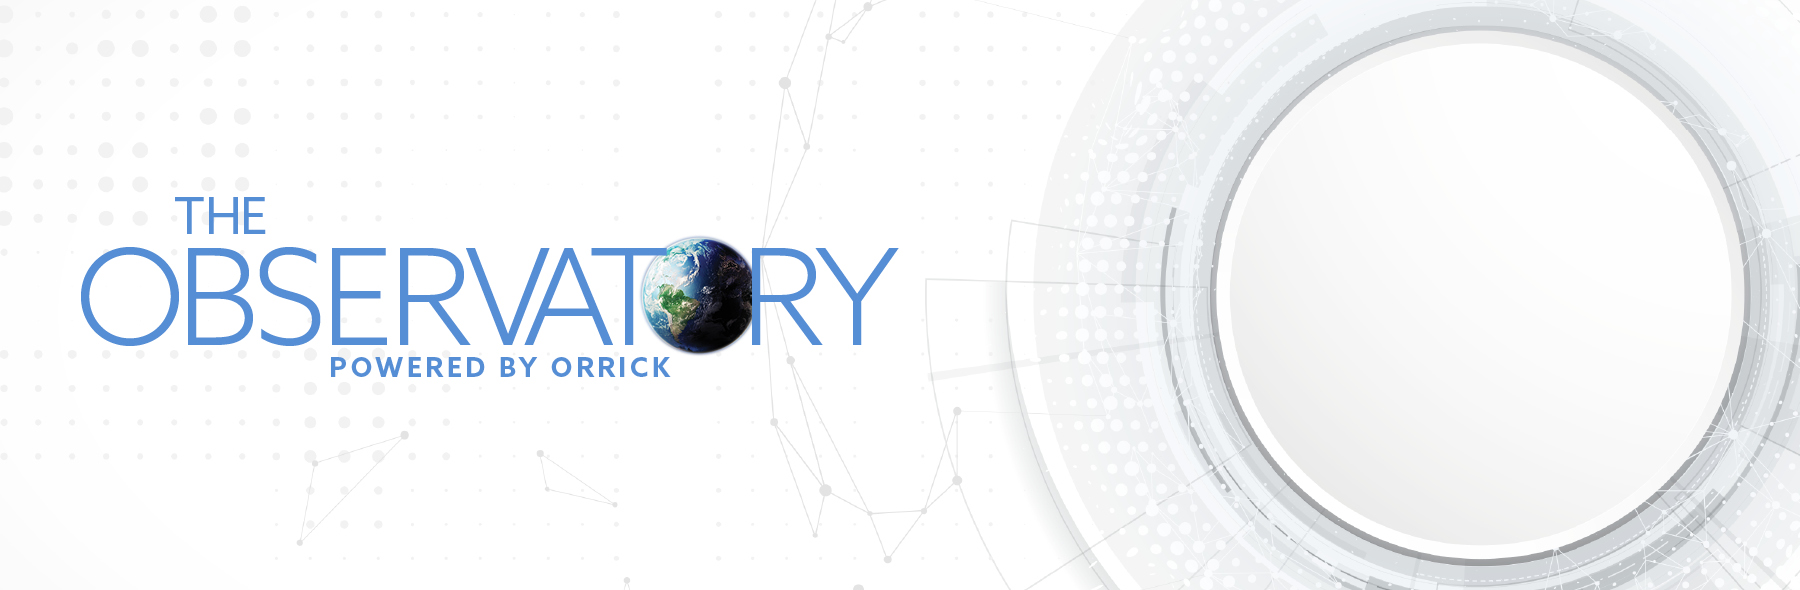 The Observatory | Powered by Orrick